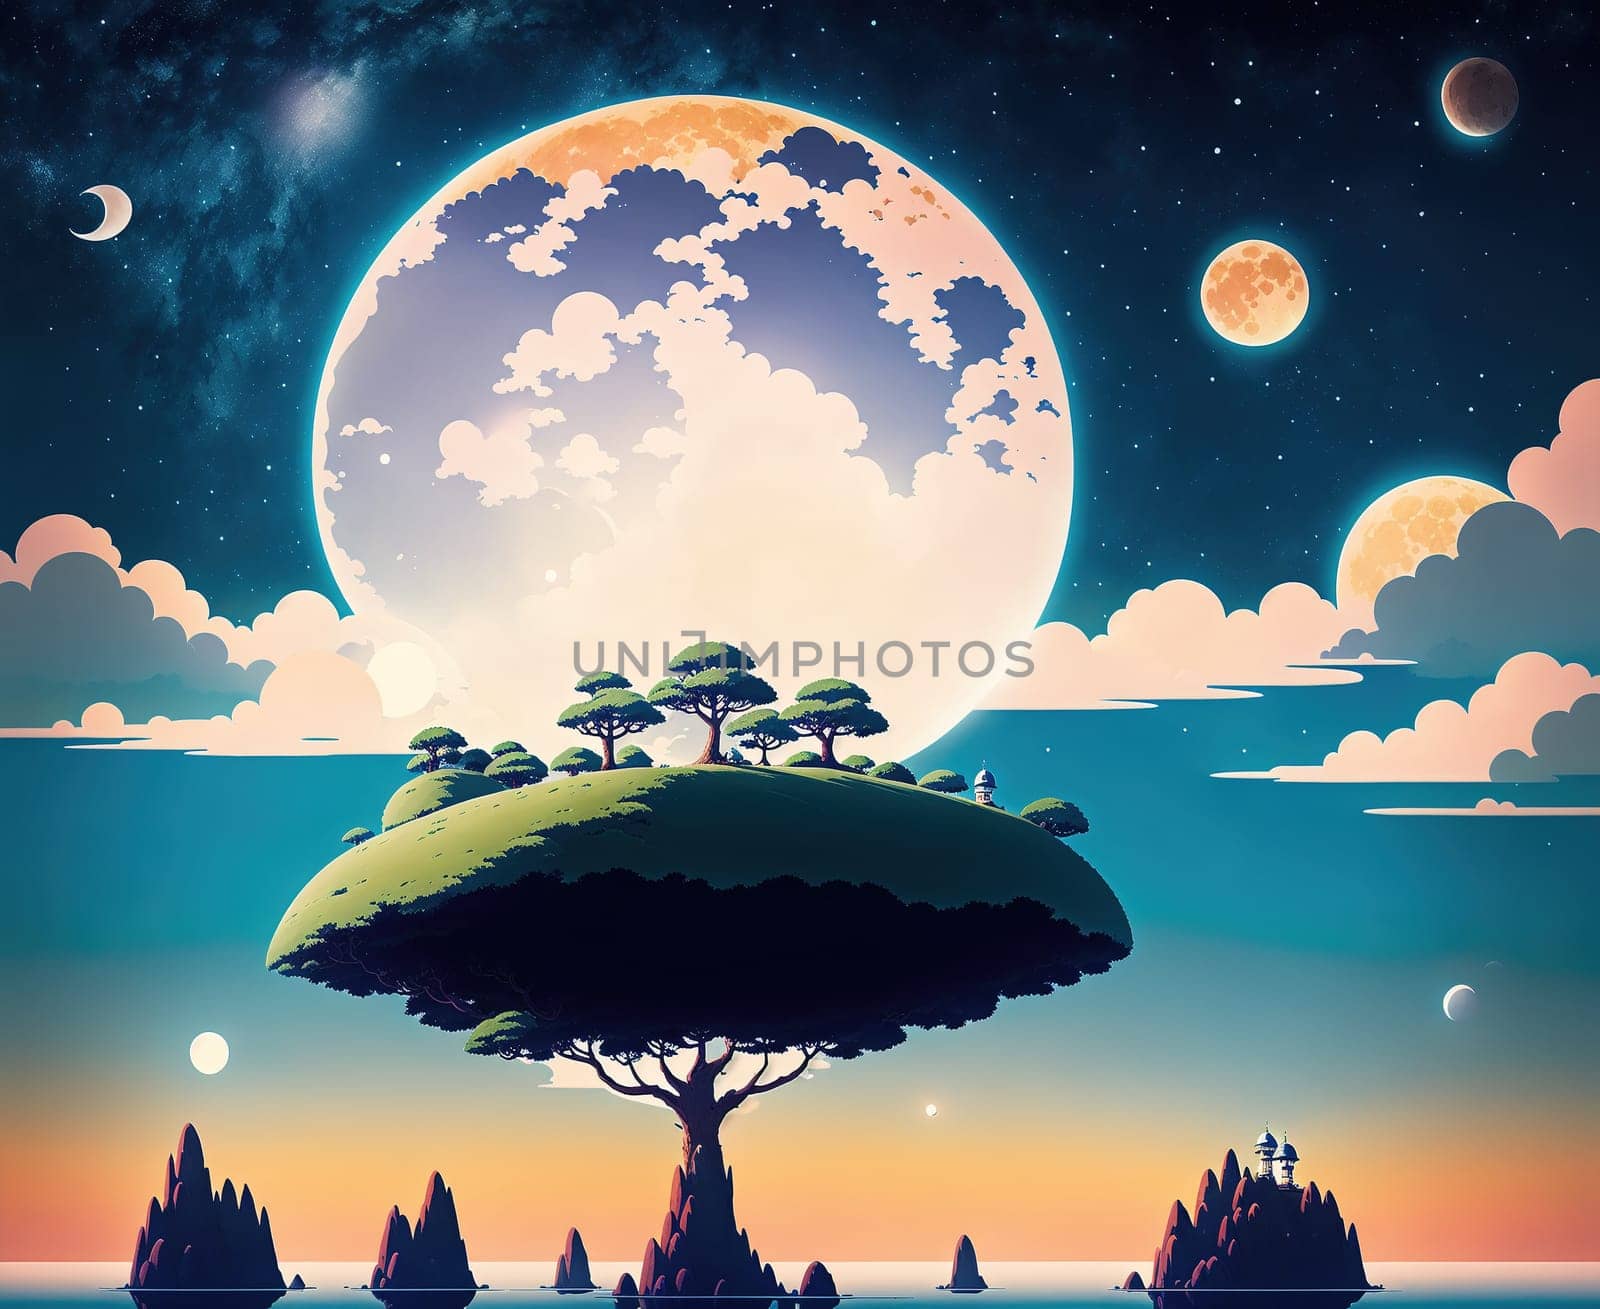 The image depicts a small island in the middle of a vast ocean, with a lone tree on top of it, surrounded by clouds and stars in the sky.